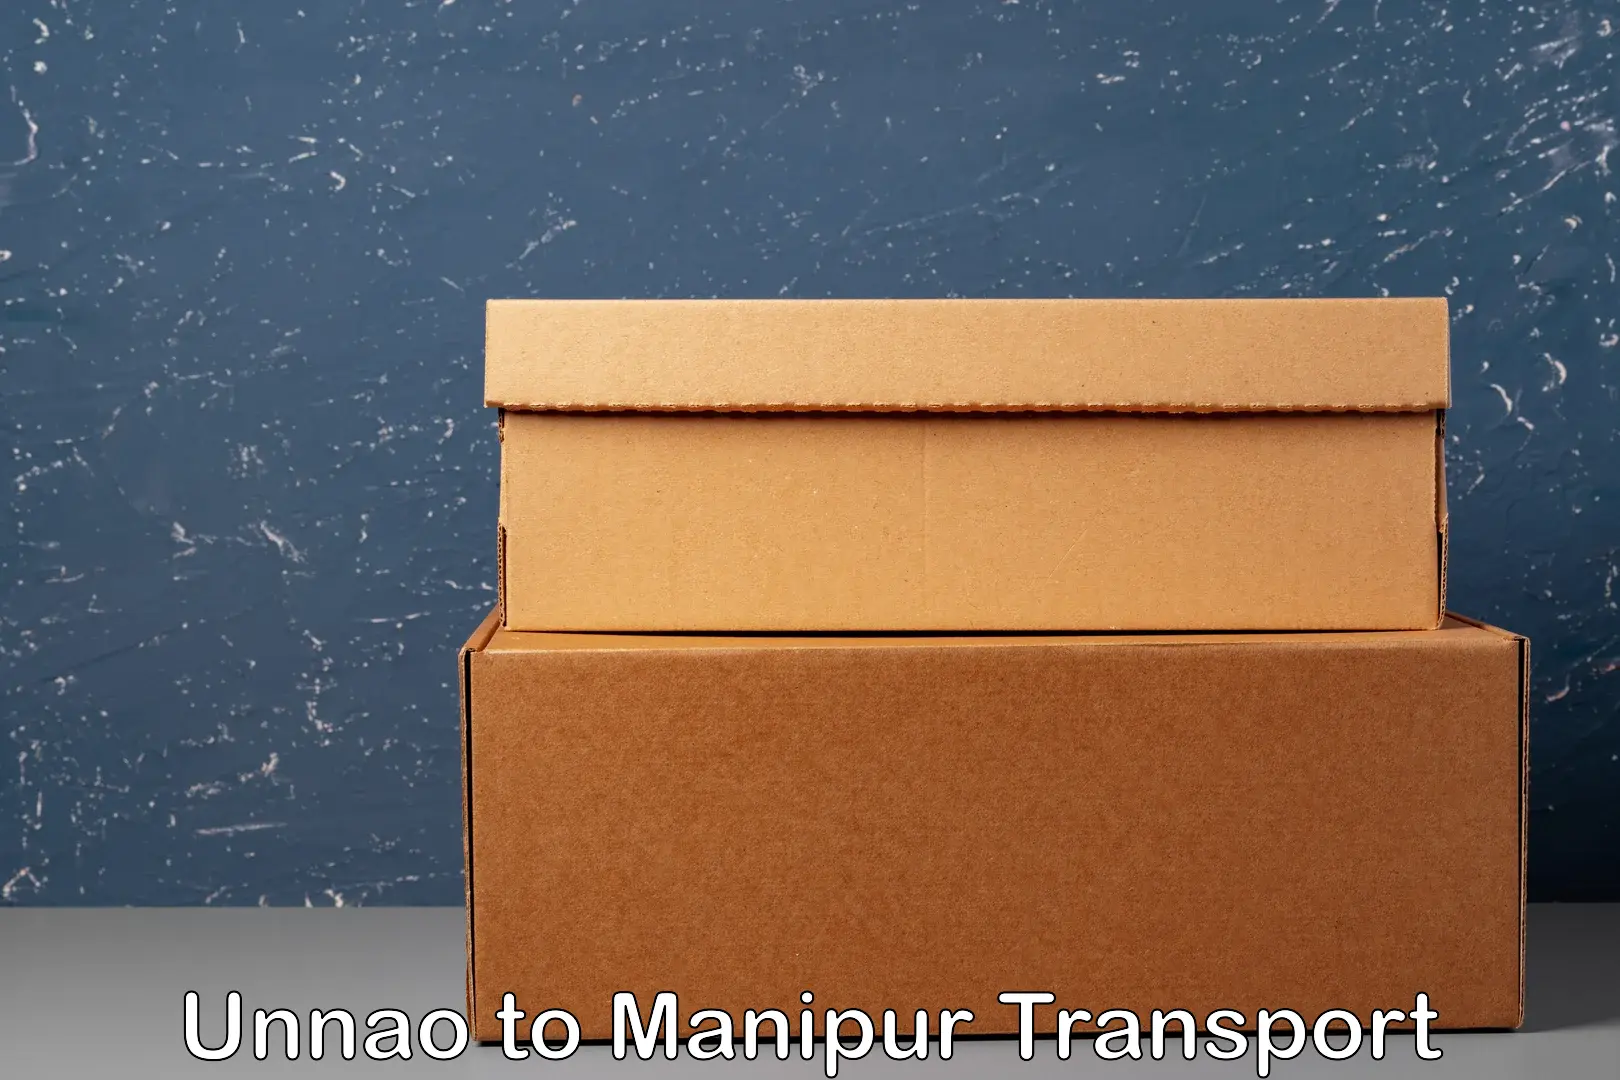 Online transport service Unnao to Imphal